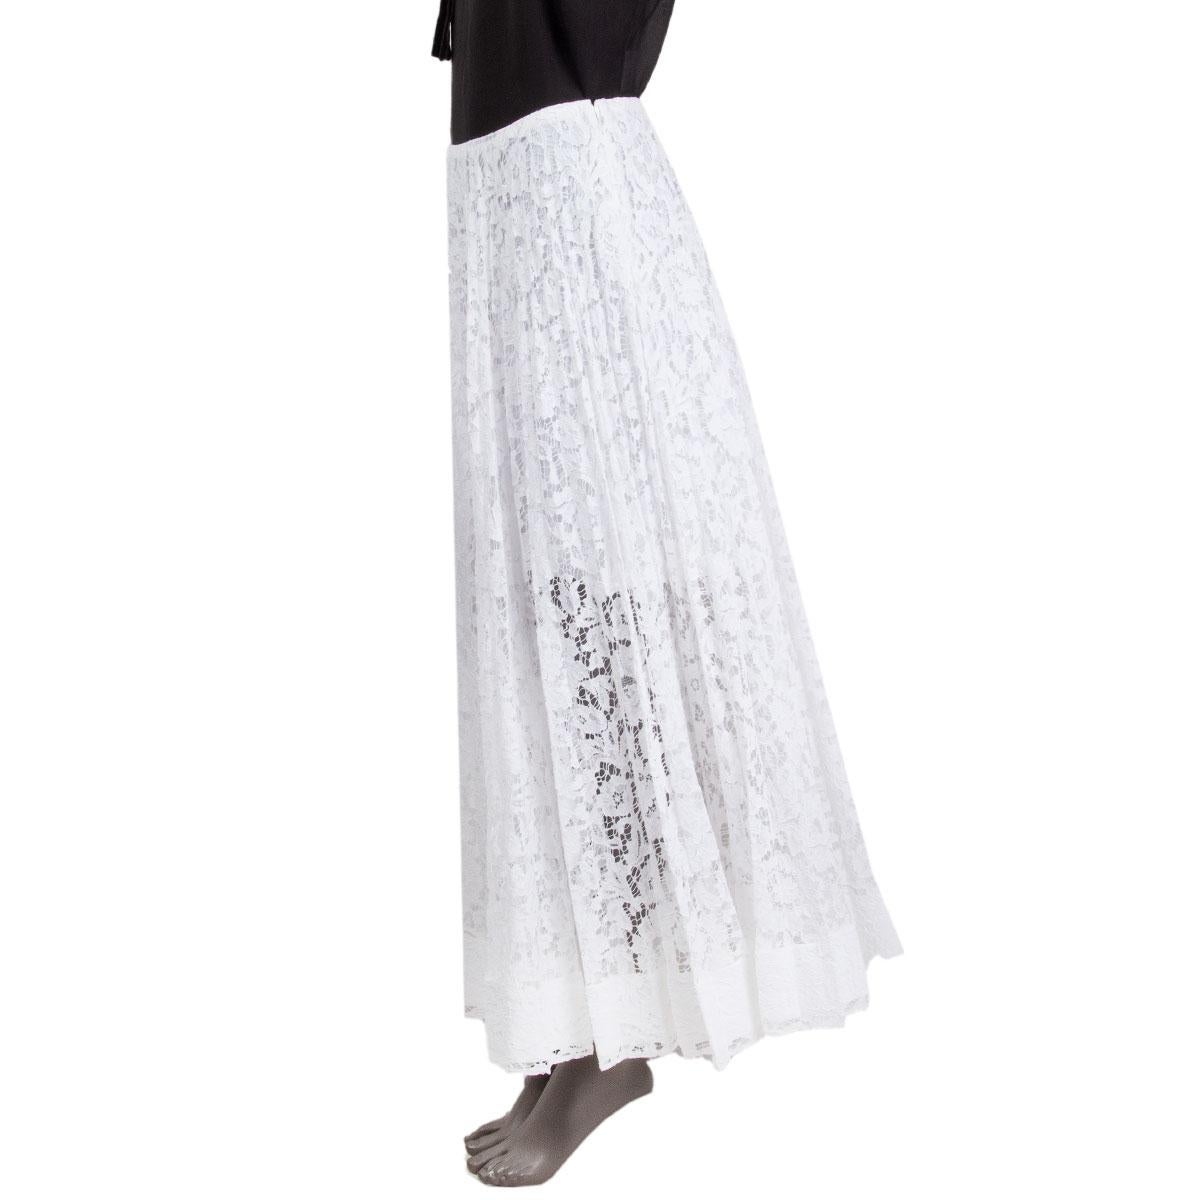 100% authentic Valentino sheer pleated lace maxi skirt in white viscose (43%), cotton (34%), polyamide (23%) (missing content tag). Closes with one hook and a concealed zipper on the side. Semi-lined in white cotton. Has been worn and is in